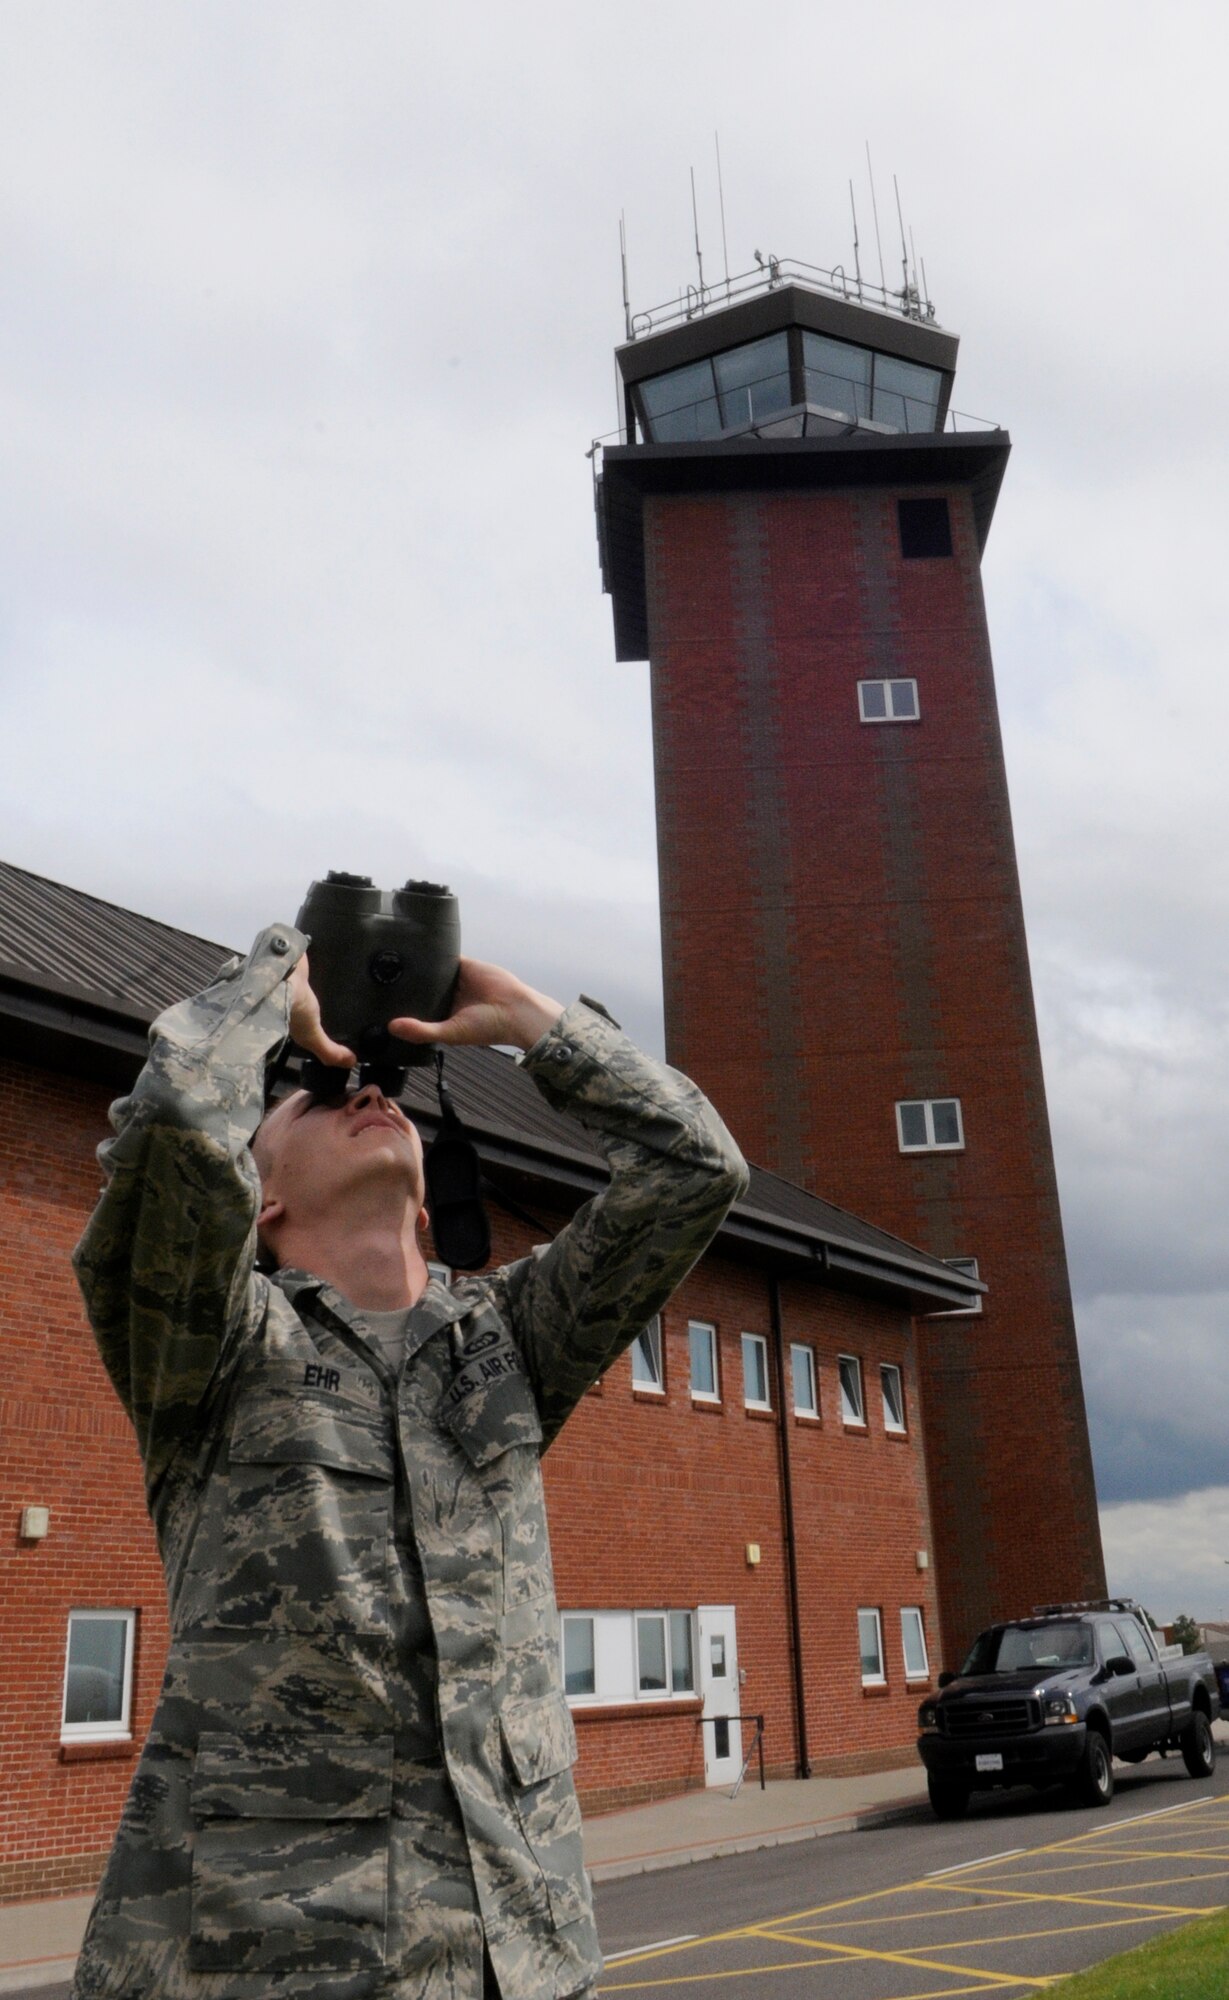 RAF MILDENHALL, England -- Staff Sgt. Dustin Ehr, 100th Operations Support Squadron weather flight, uses a digital range finder to determine cloud heights Aug. 20.  As a member of the weather flight, Sergeant Ehr is charged with providing accurate forecasts to pilots before and during missions.  (U.S. Air Force photo by Staff Sgt. Christopher L. Ingersoll)